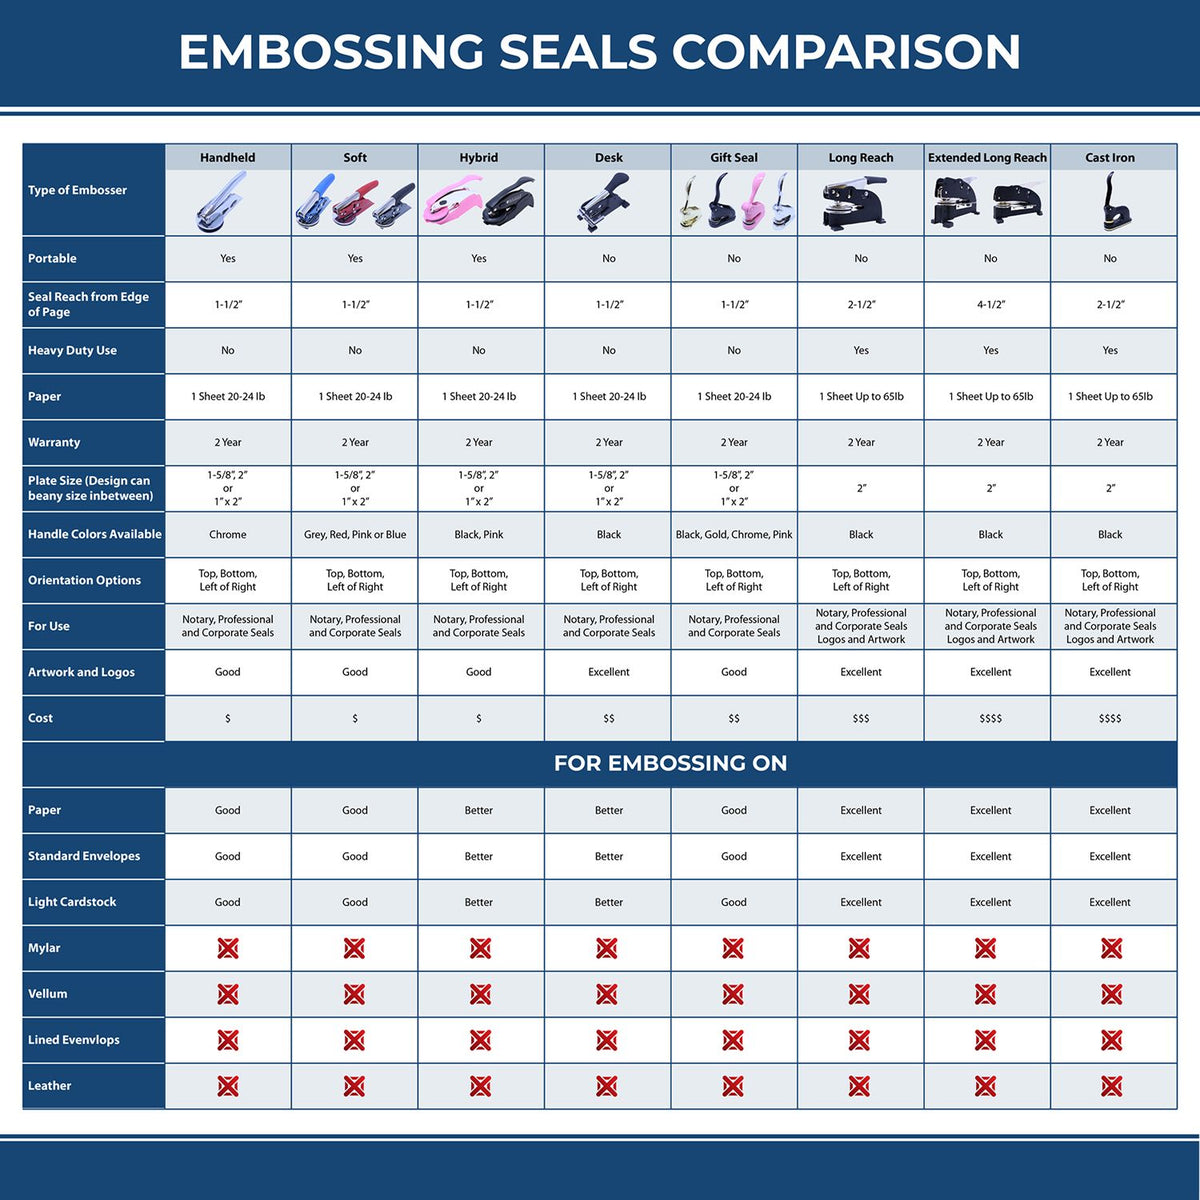 A comparison chart for the different types of mount models available for the Heavy Duty Cast Iron California Engineer Seal Embosser.